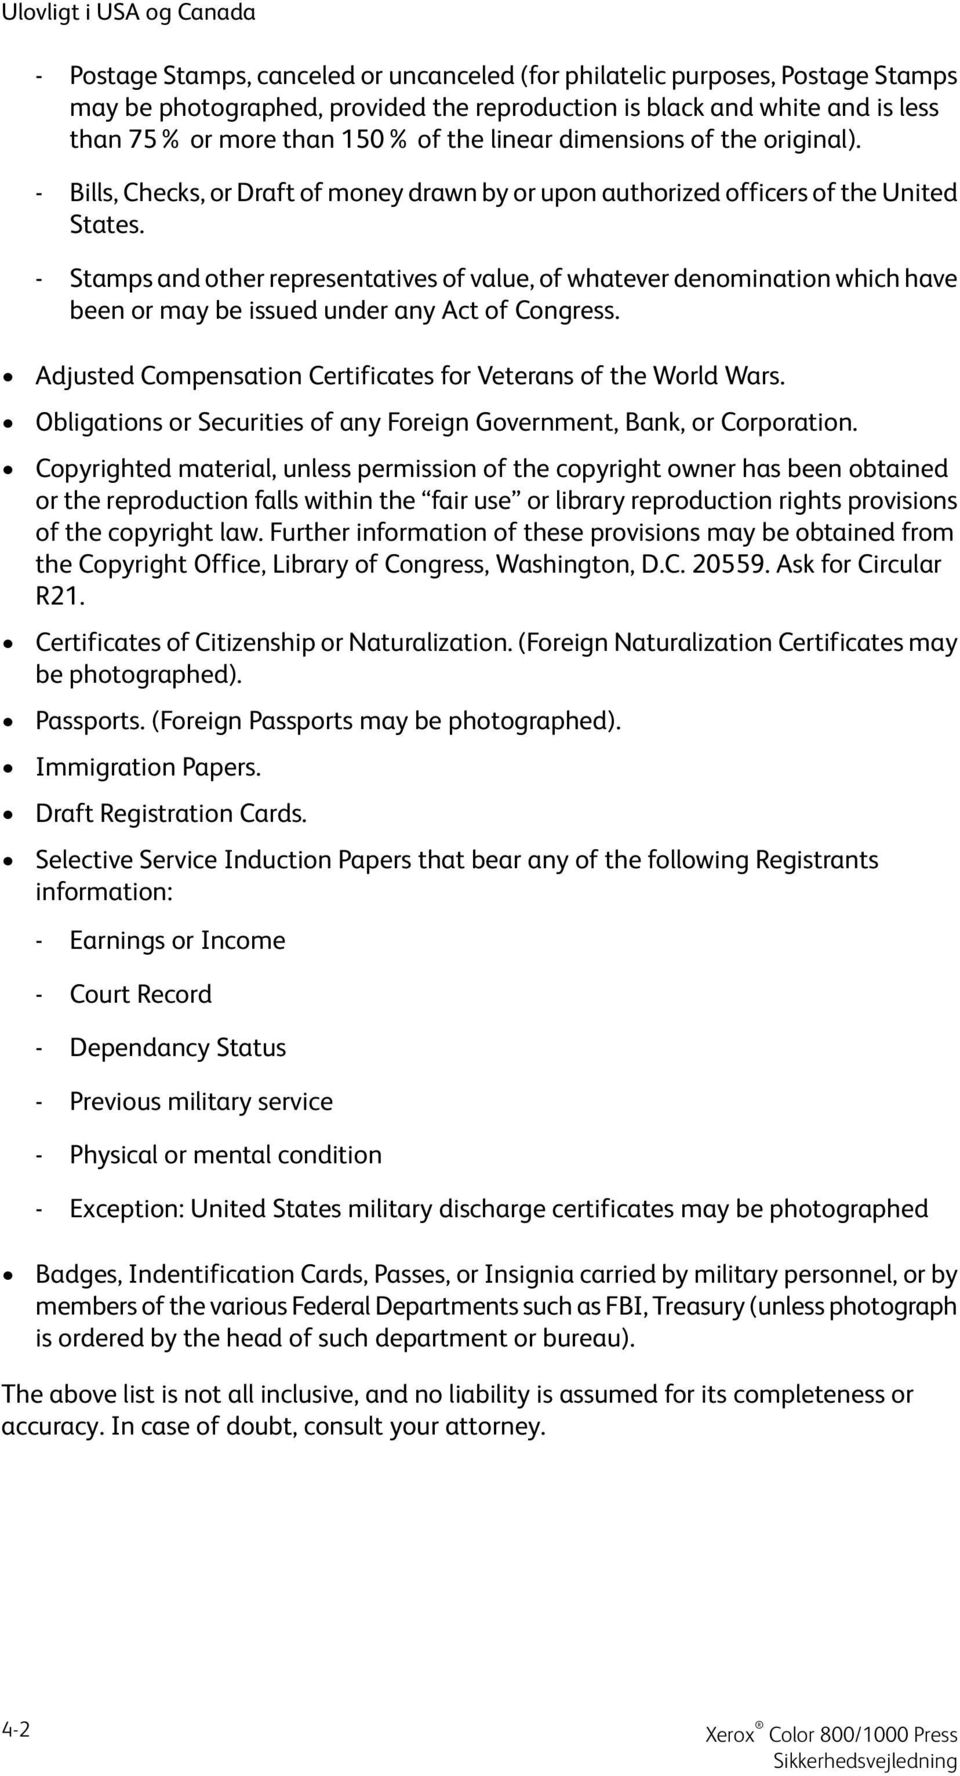 - Stamps and other representatives of value, of whatever denomination which have been or may be issued under any Act of Congress. Adjusted Compensation Certificates for Veterans of the World Wars.